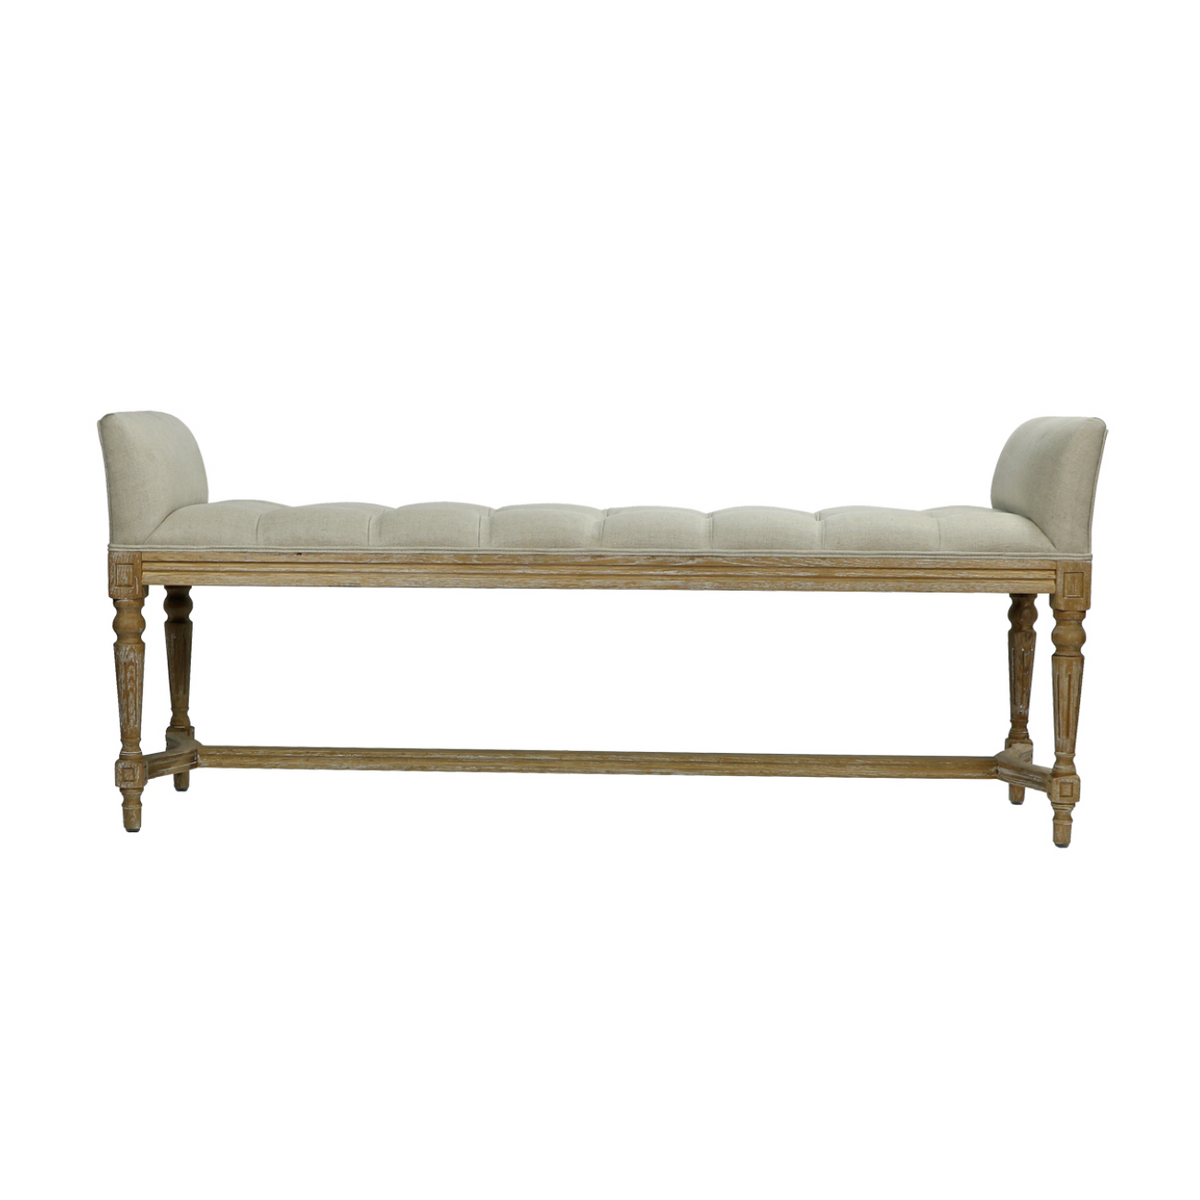 Tufted Linen Bench